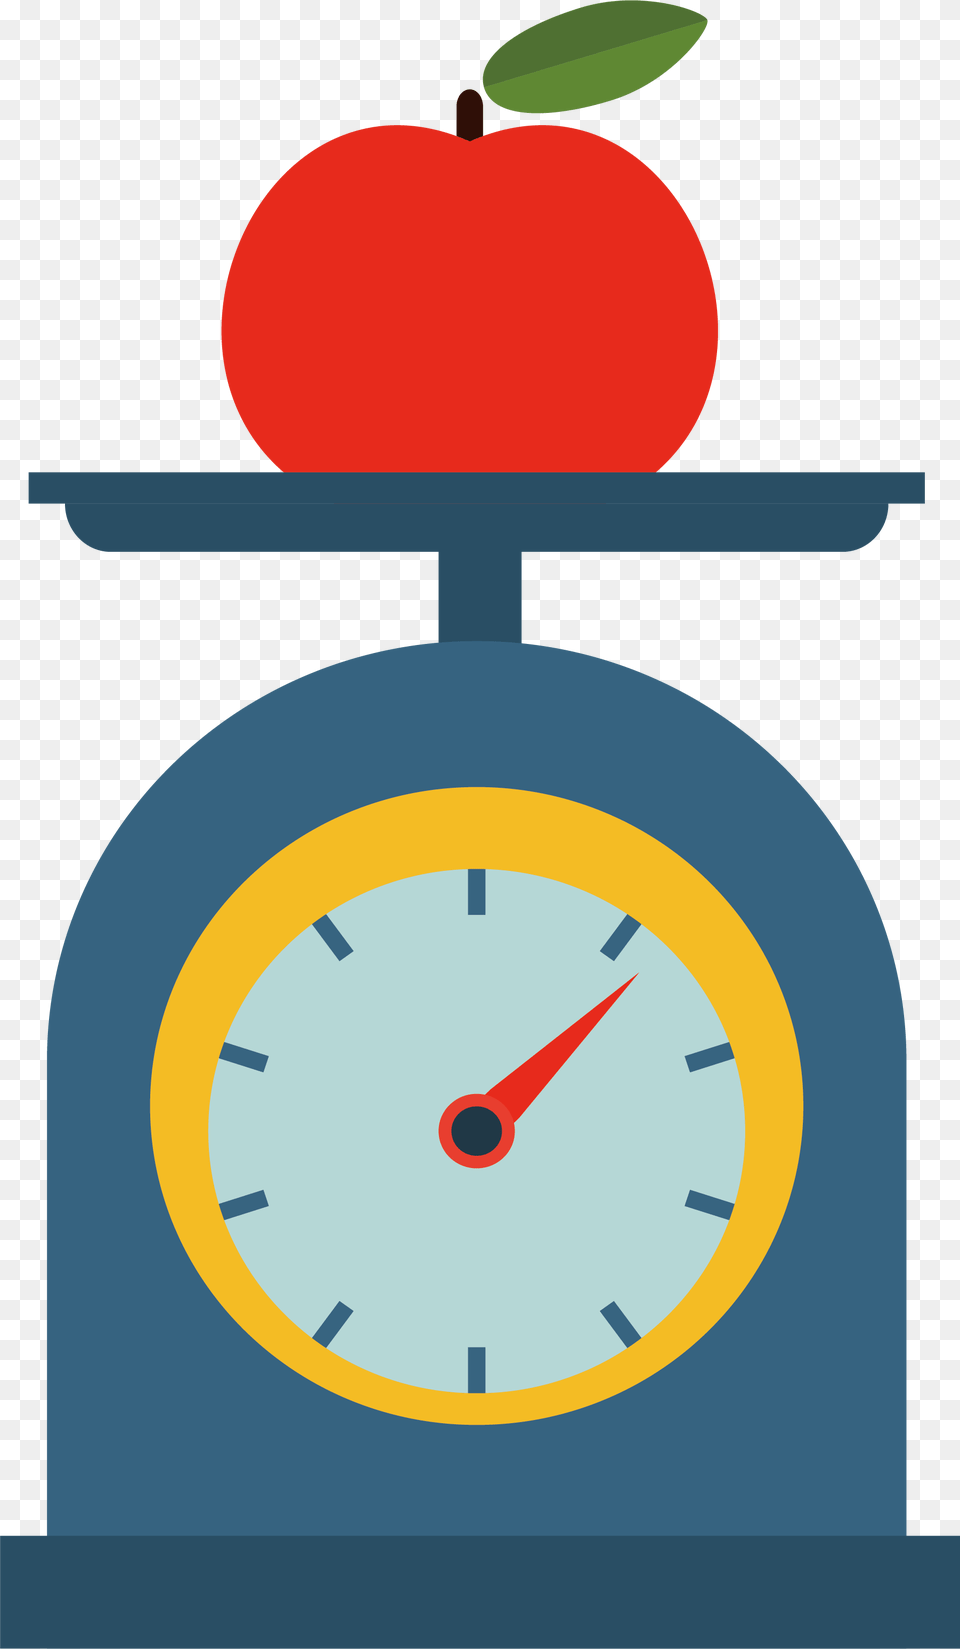 Scale Clipart Apple Weight Weighing Scale Scale Clipart, Alarm Clock, Clock, Analog Clock, Disk Png